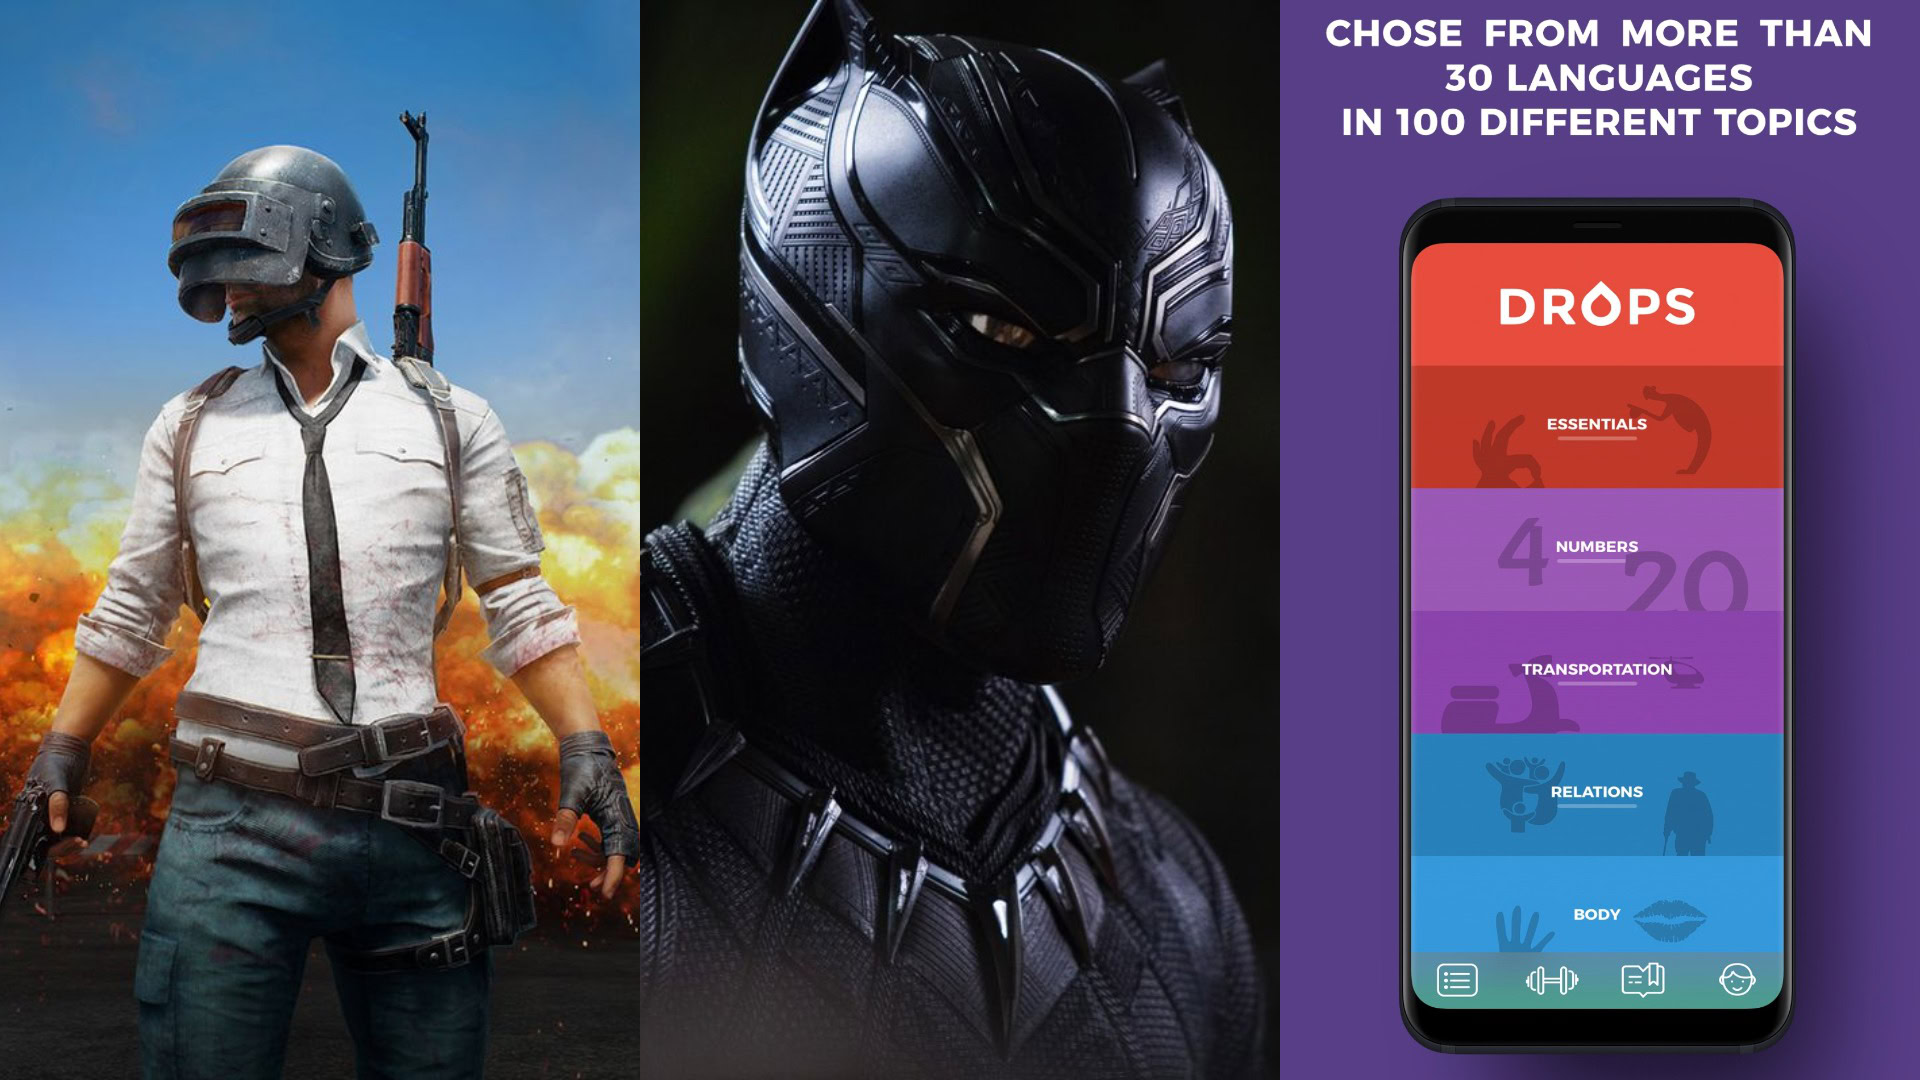 Google Play Store's Best Apps and Games of 2019 Revealed